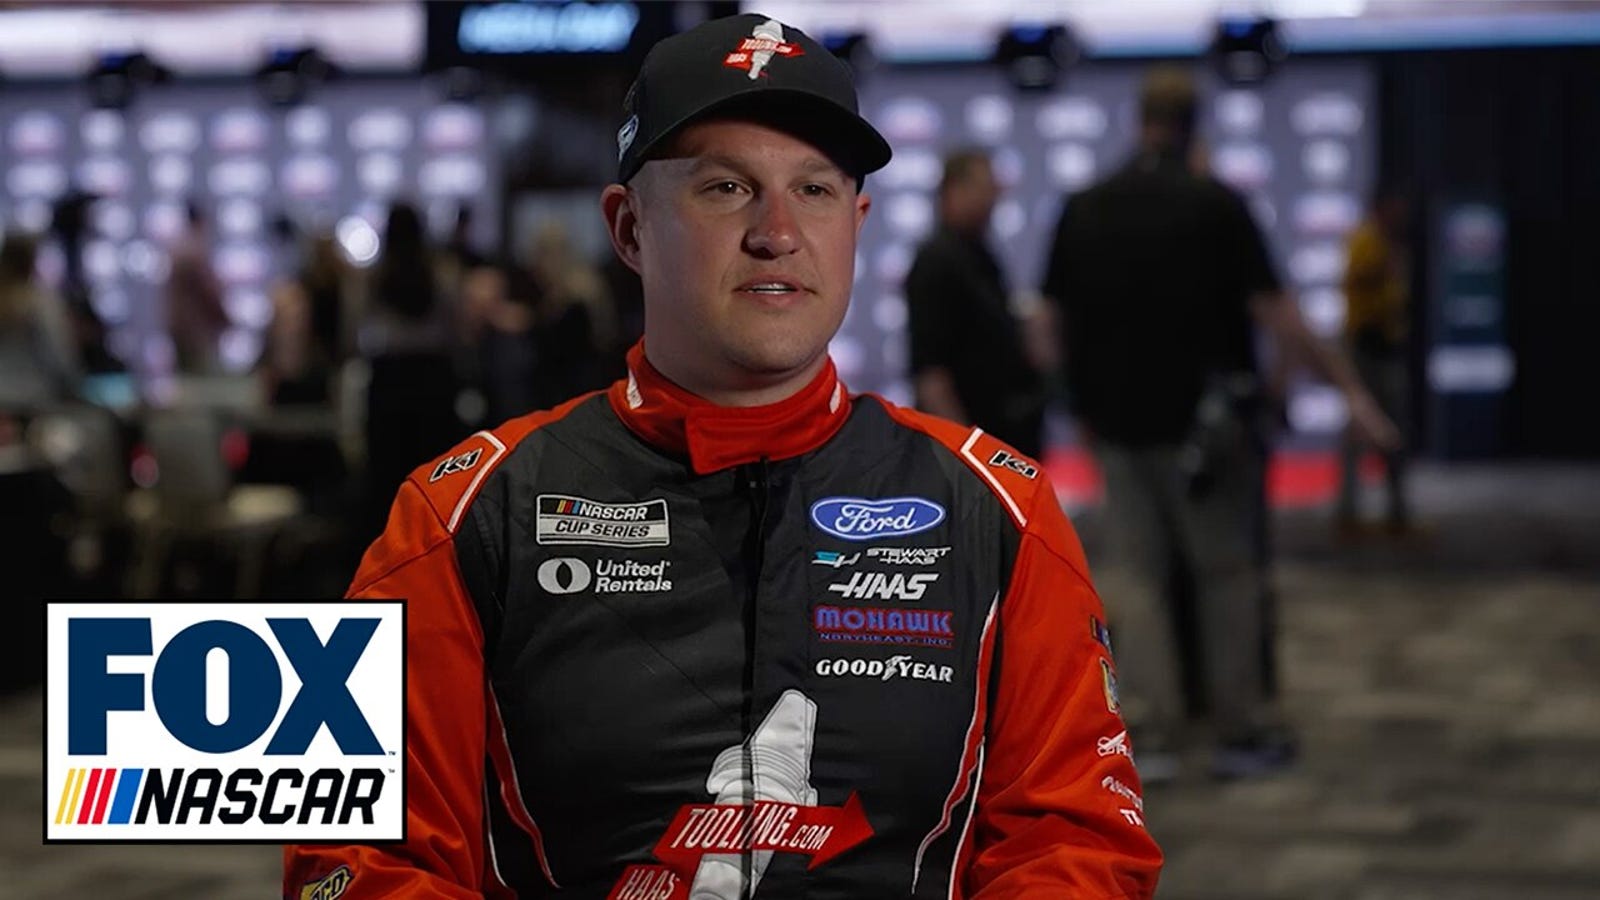 'We as race-car drivers have to be numb to it' — Ryan Preece on return to Daytona after wild flip in August